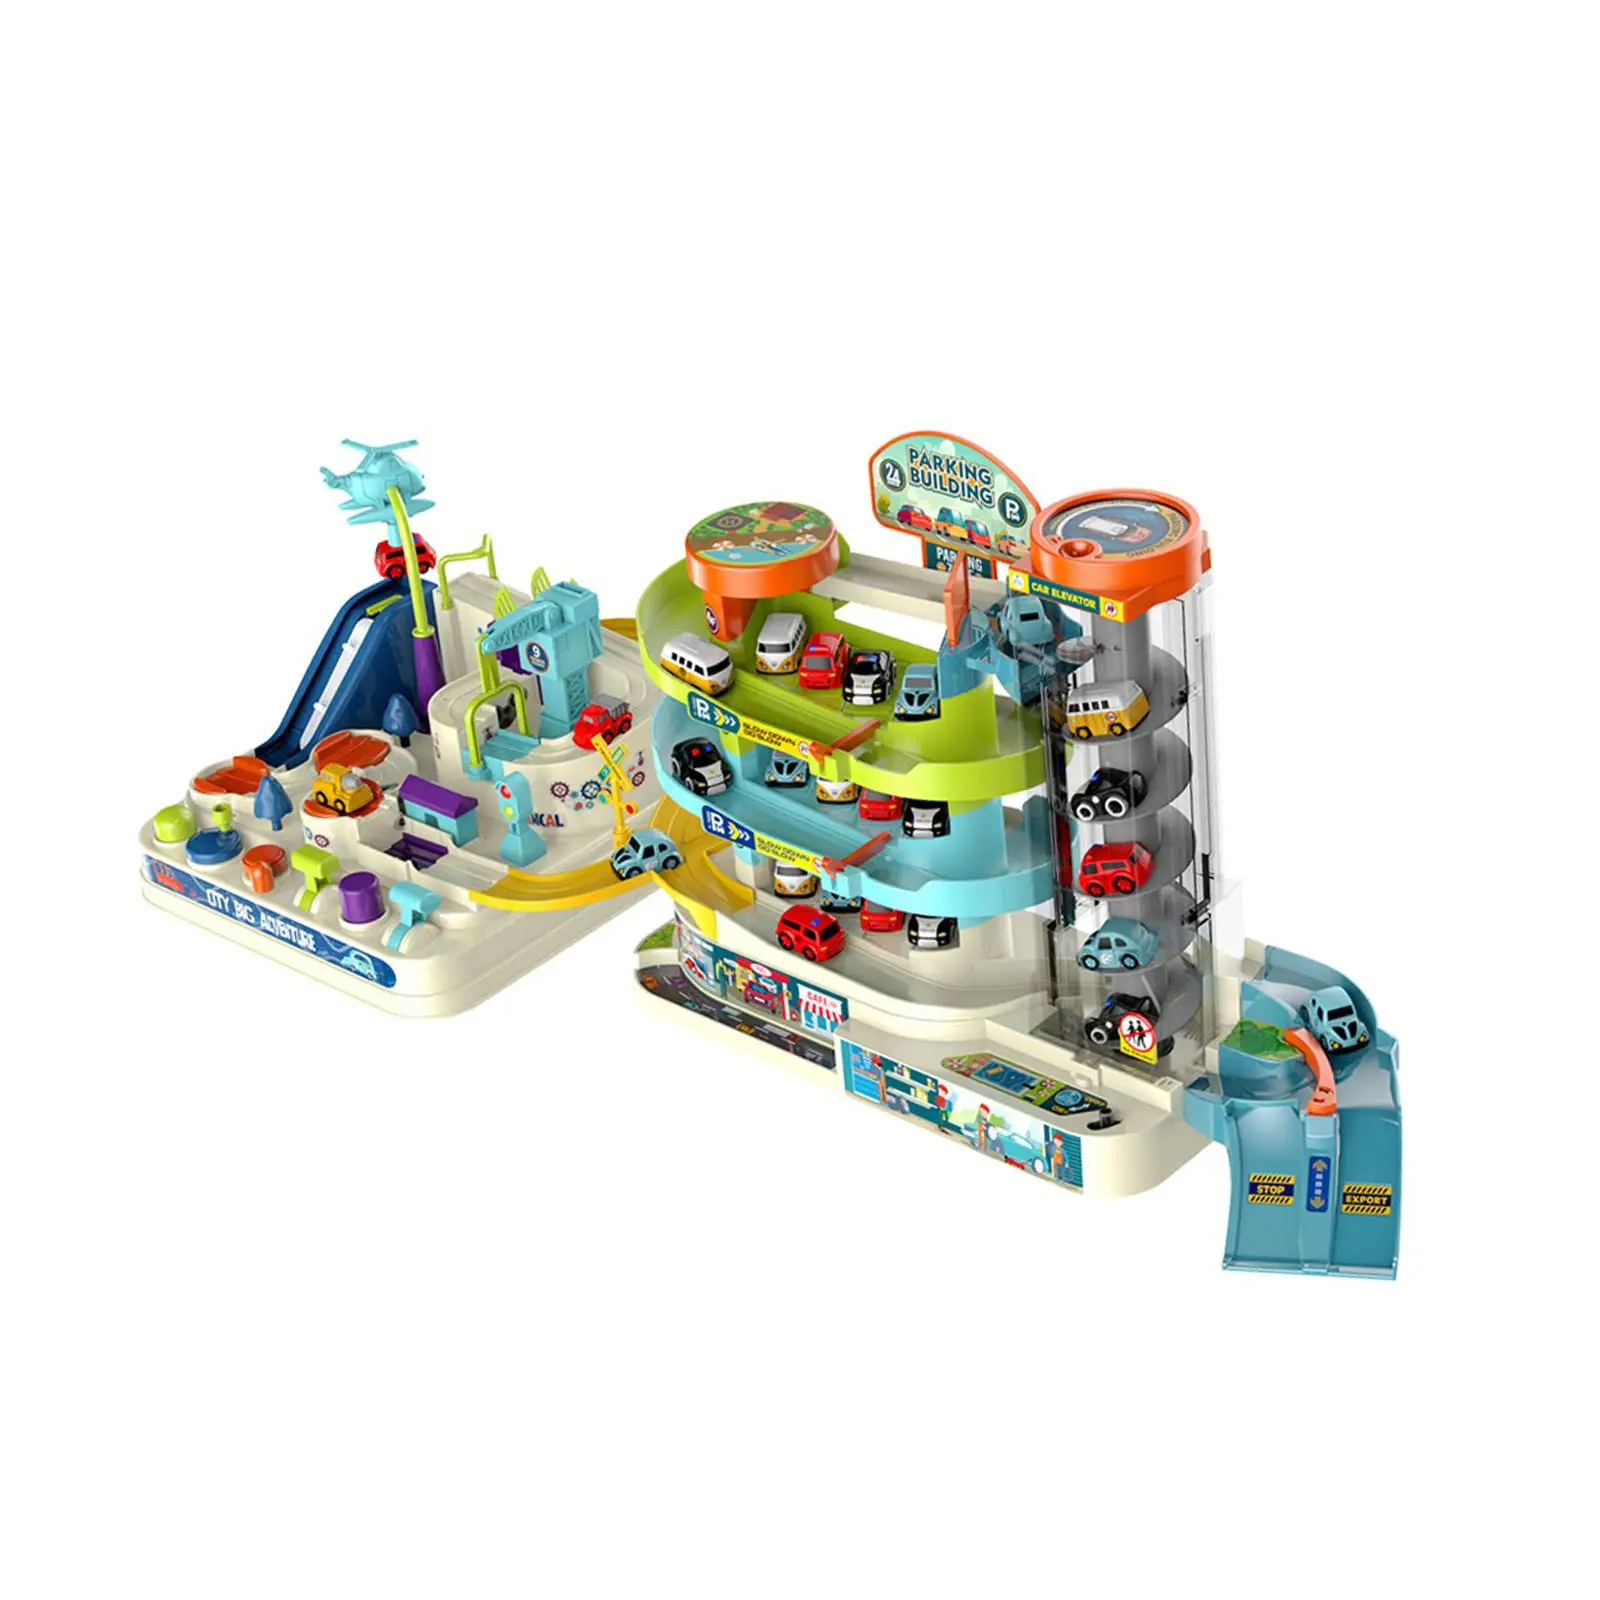 City Car Parking Toy Set with Electric Elevator 3 Level Race Car Toy